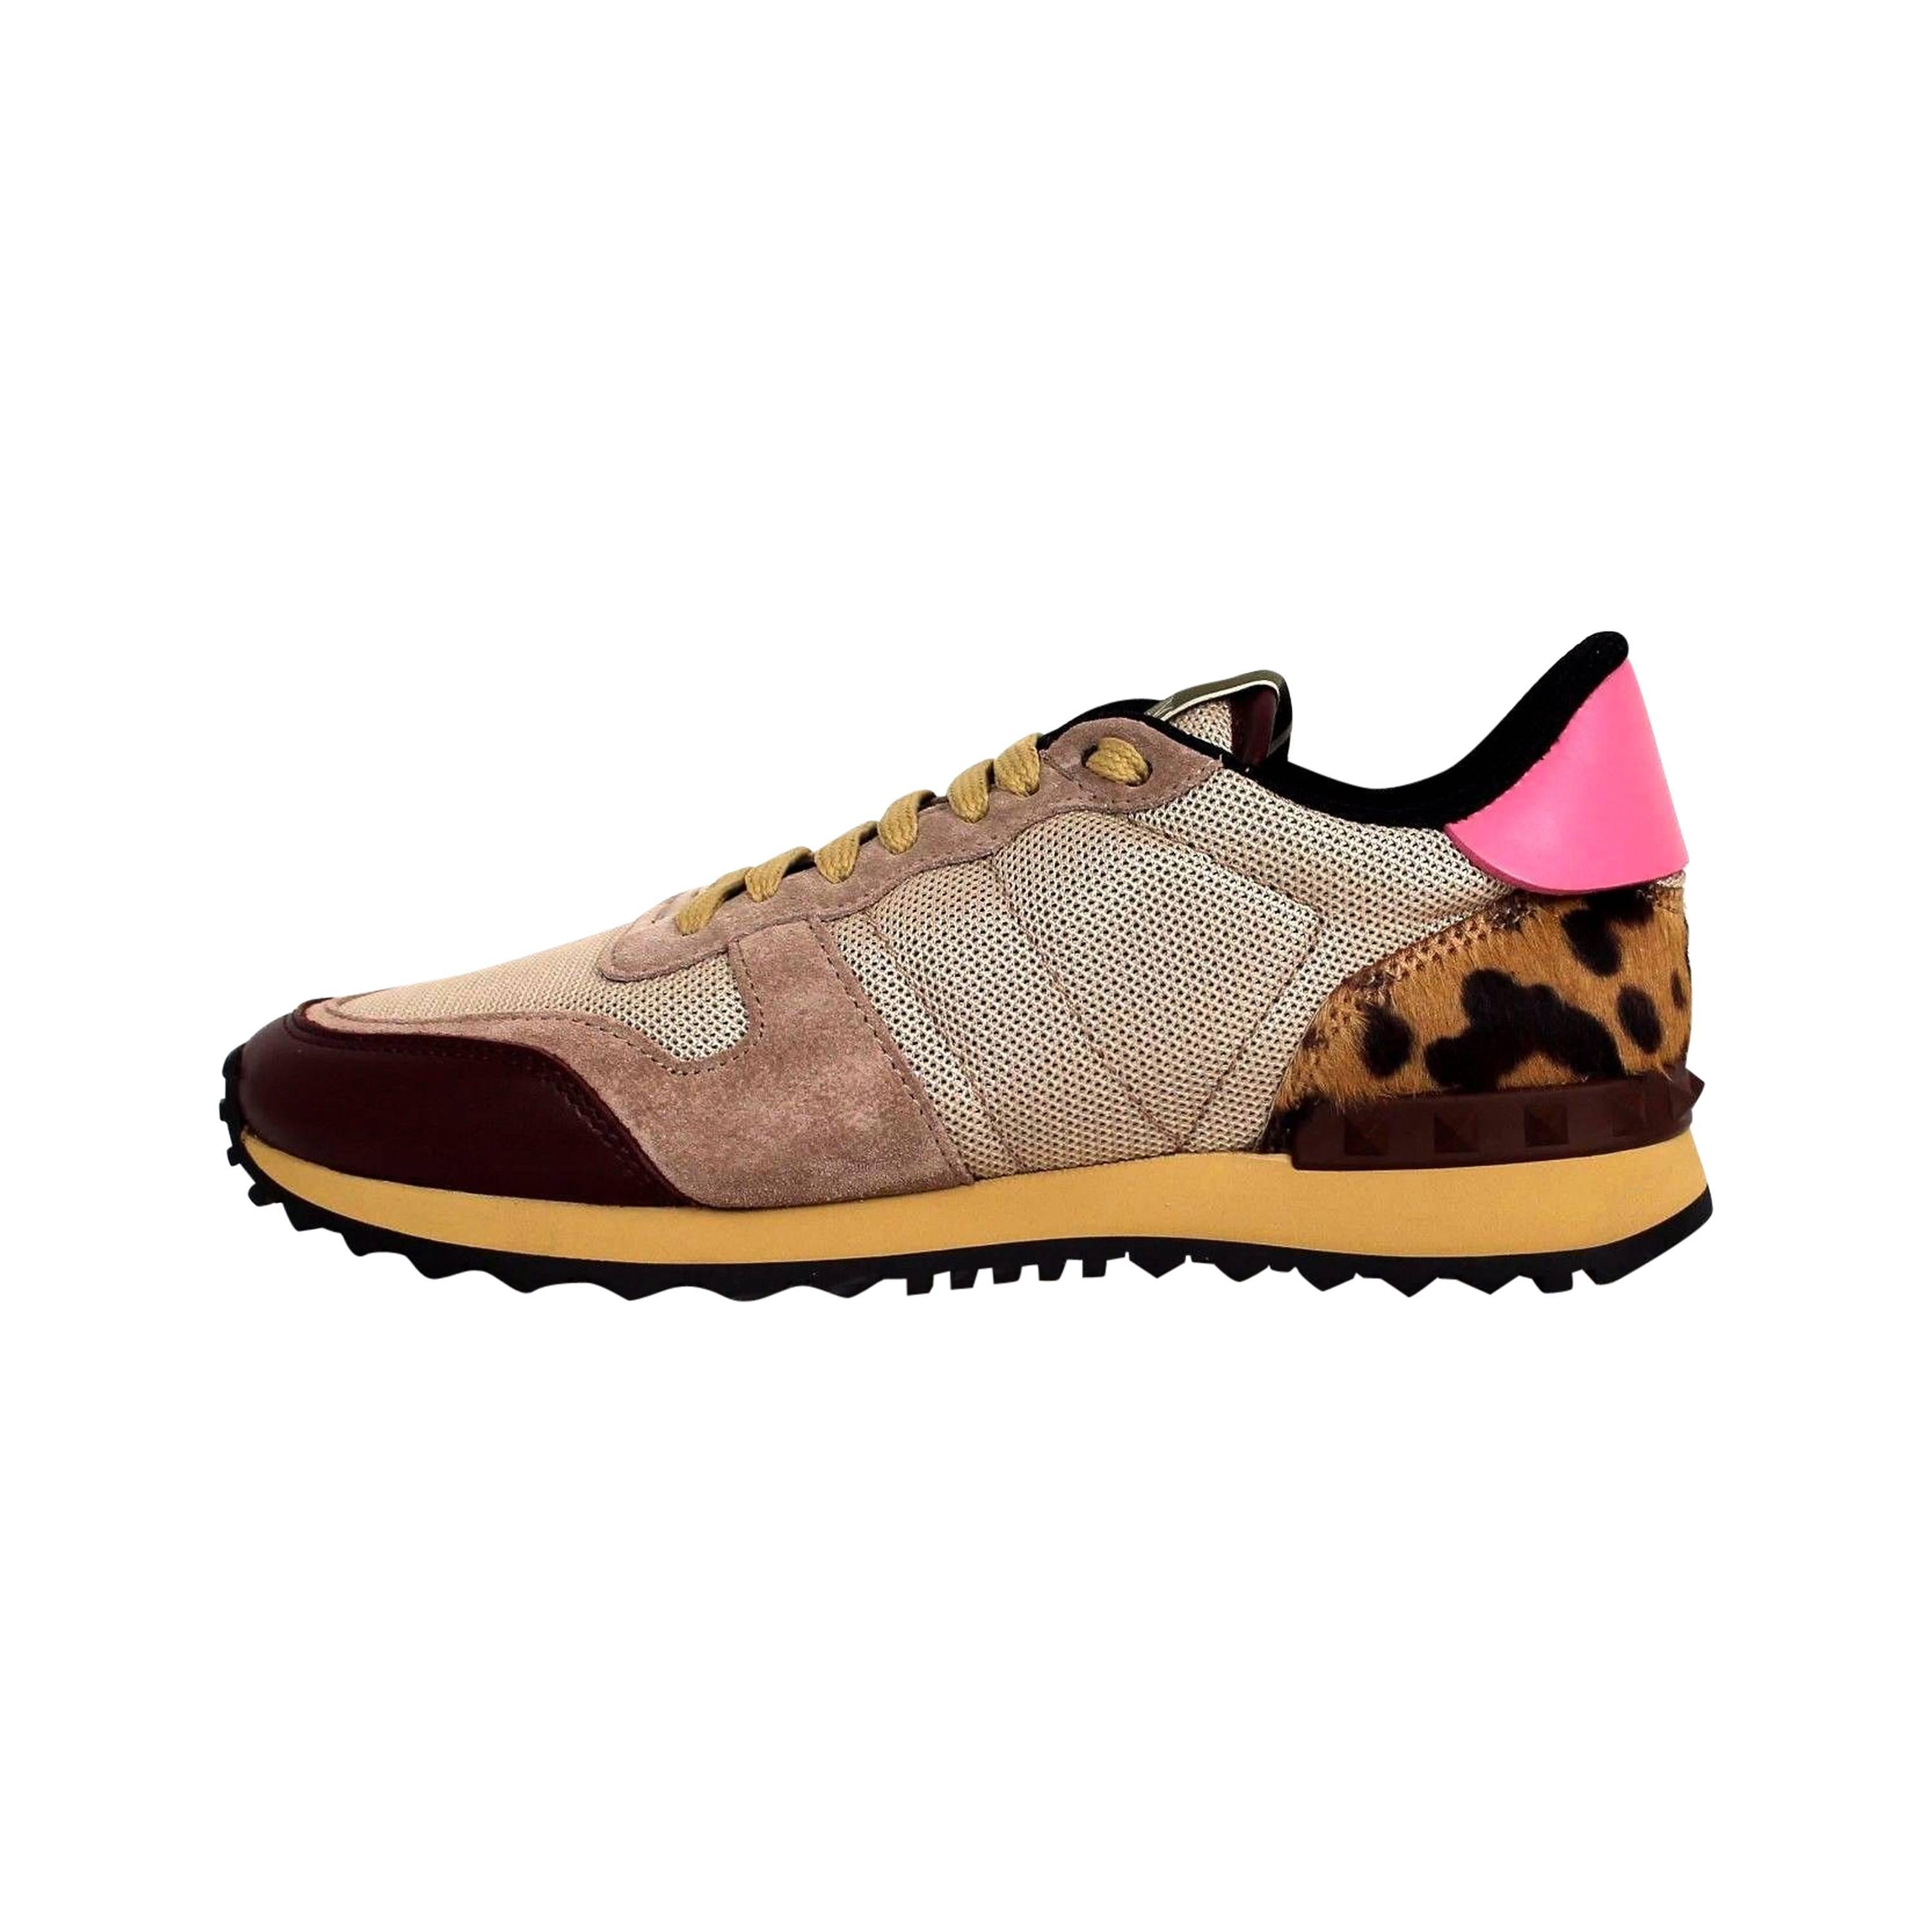 Valentino Pink Beige Leather Suede Leopard Print Calf Hair Lace Up Sneakers New For Sale